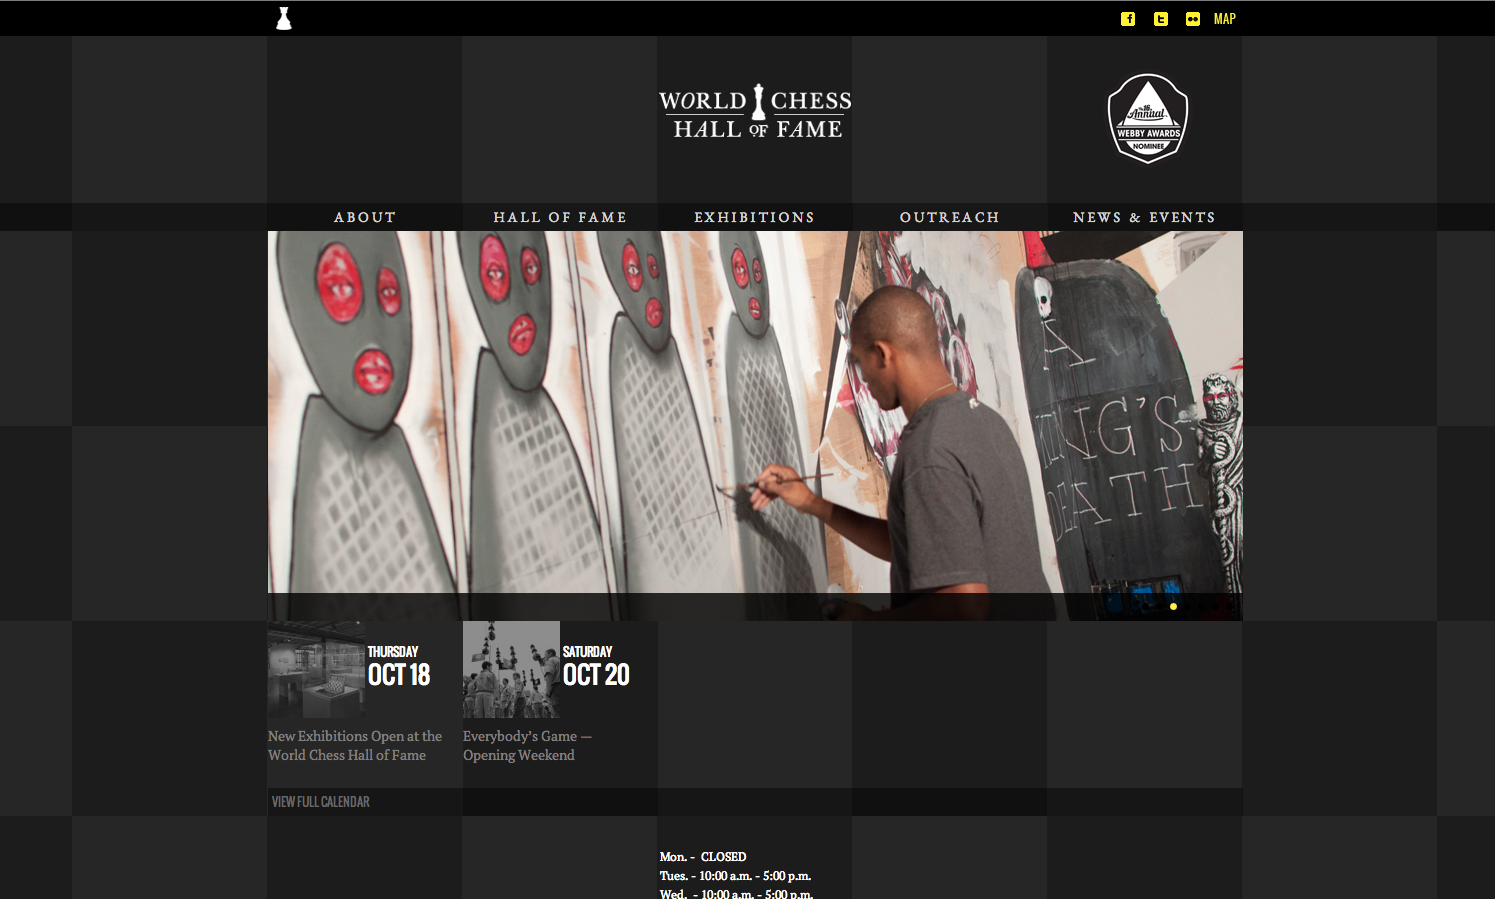 World Chess Hall of Fame website